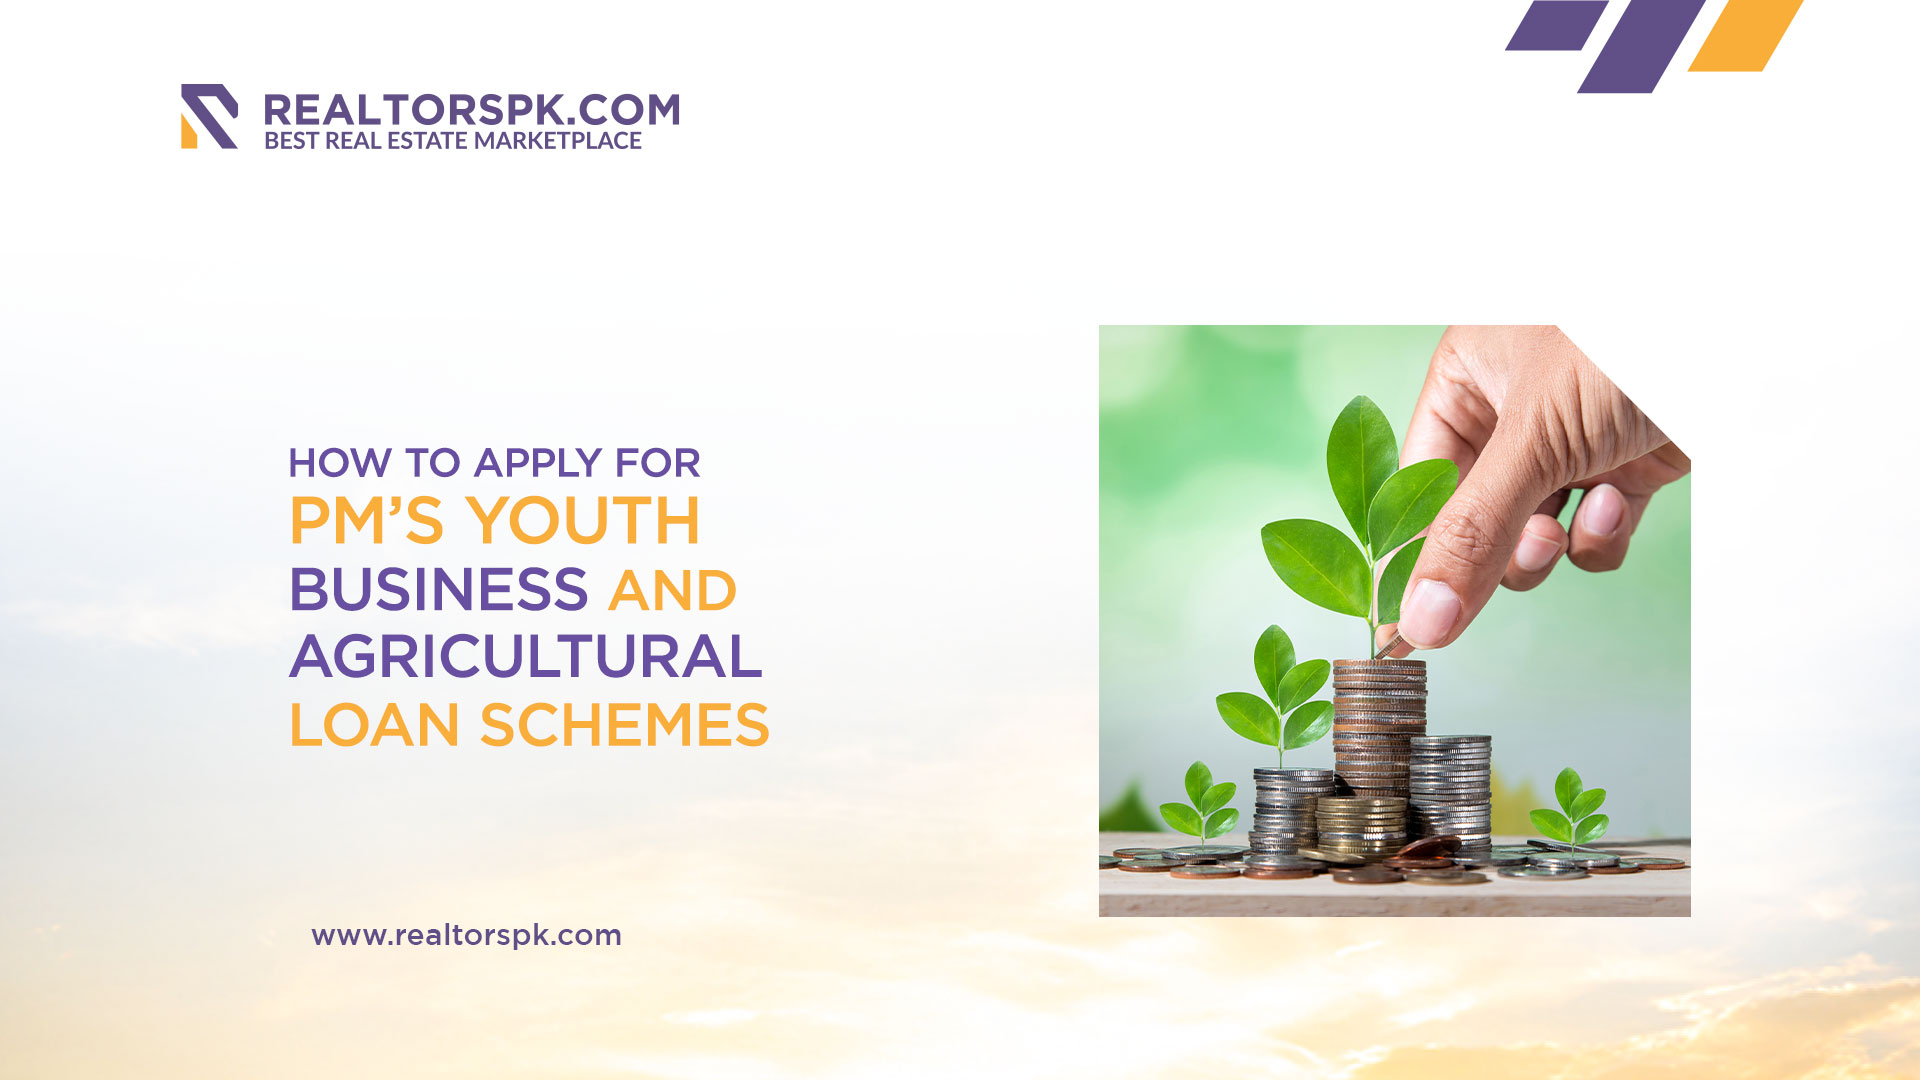 How to Apply for PM Youth Business and Agricultural Loan Schemes-Realtorspk